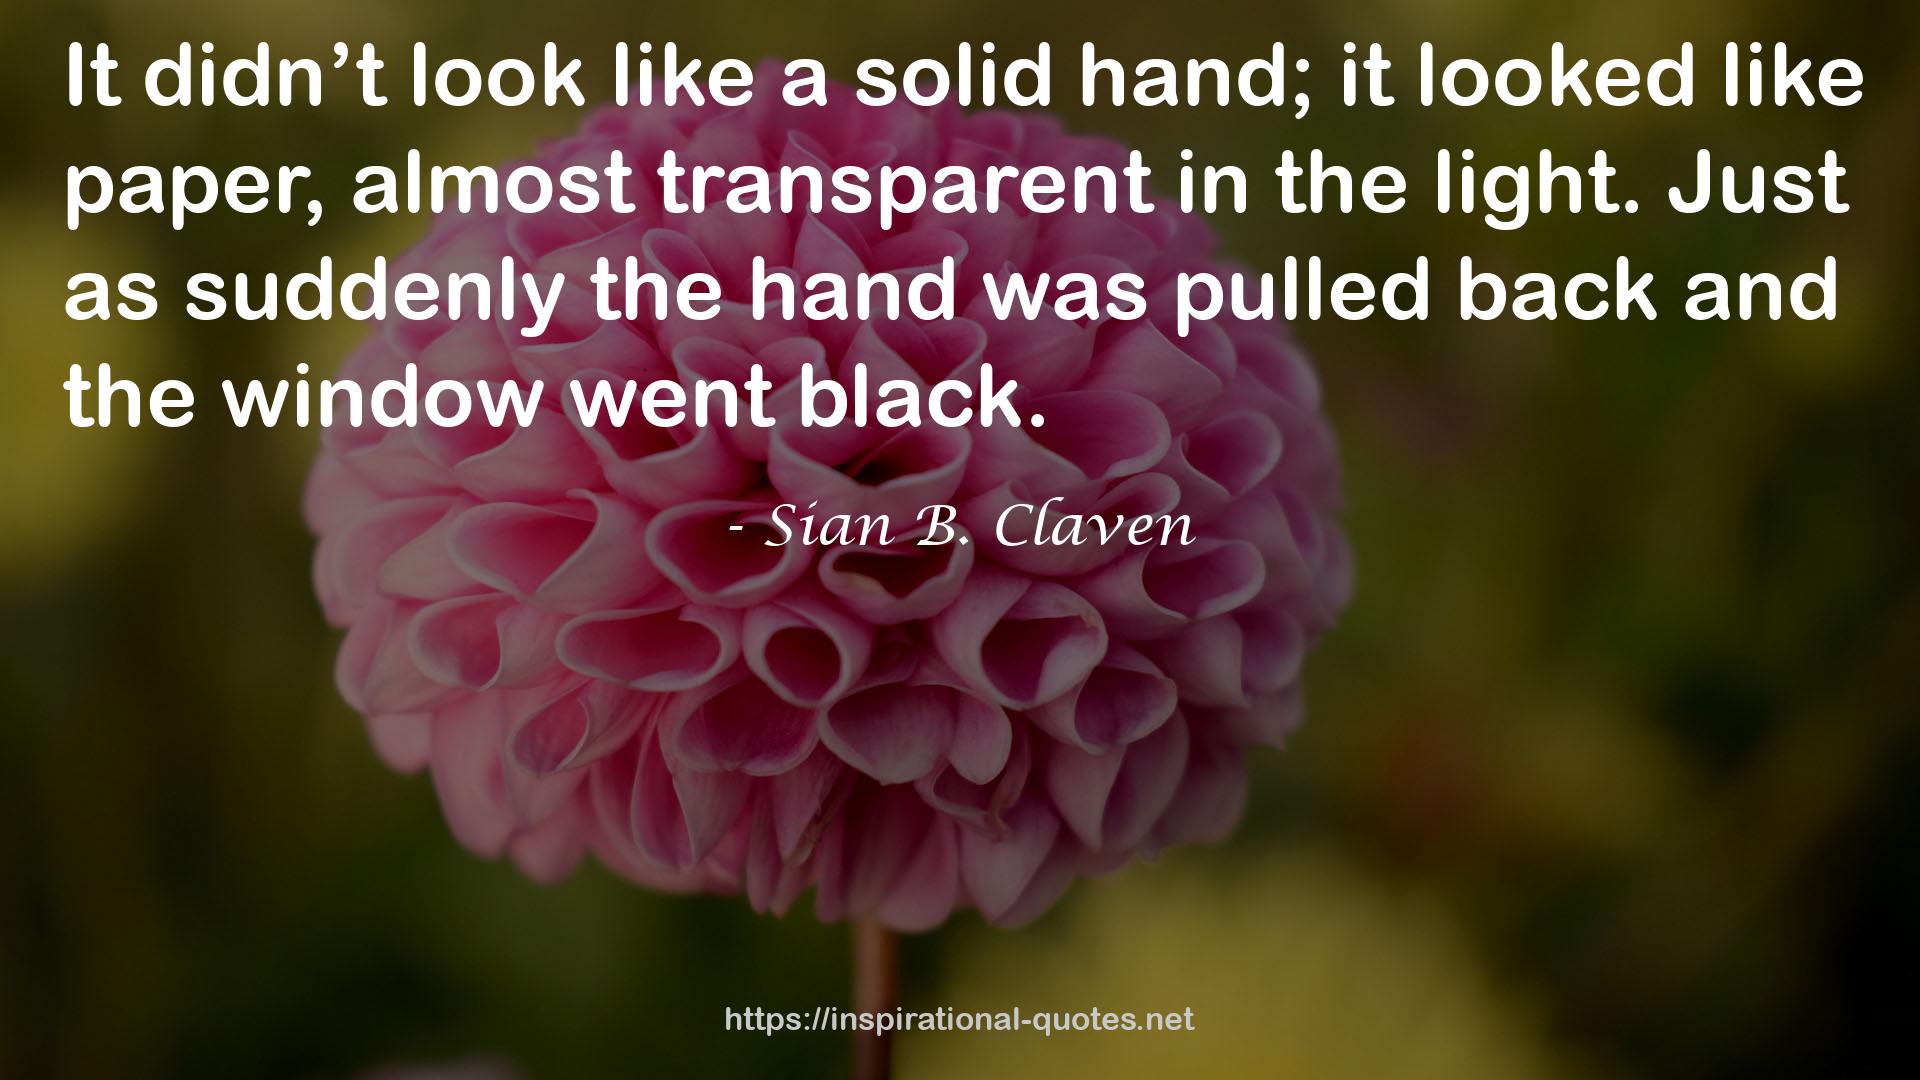 Sian B. Claven QUOTES